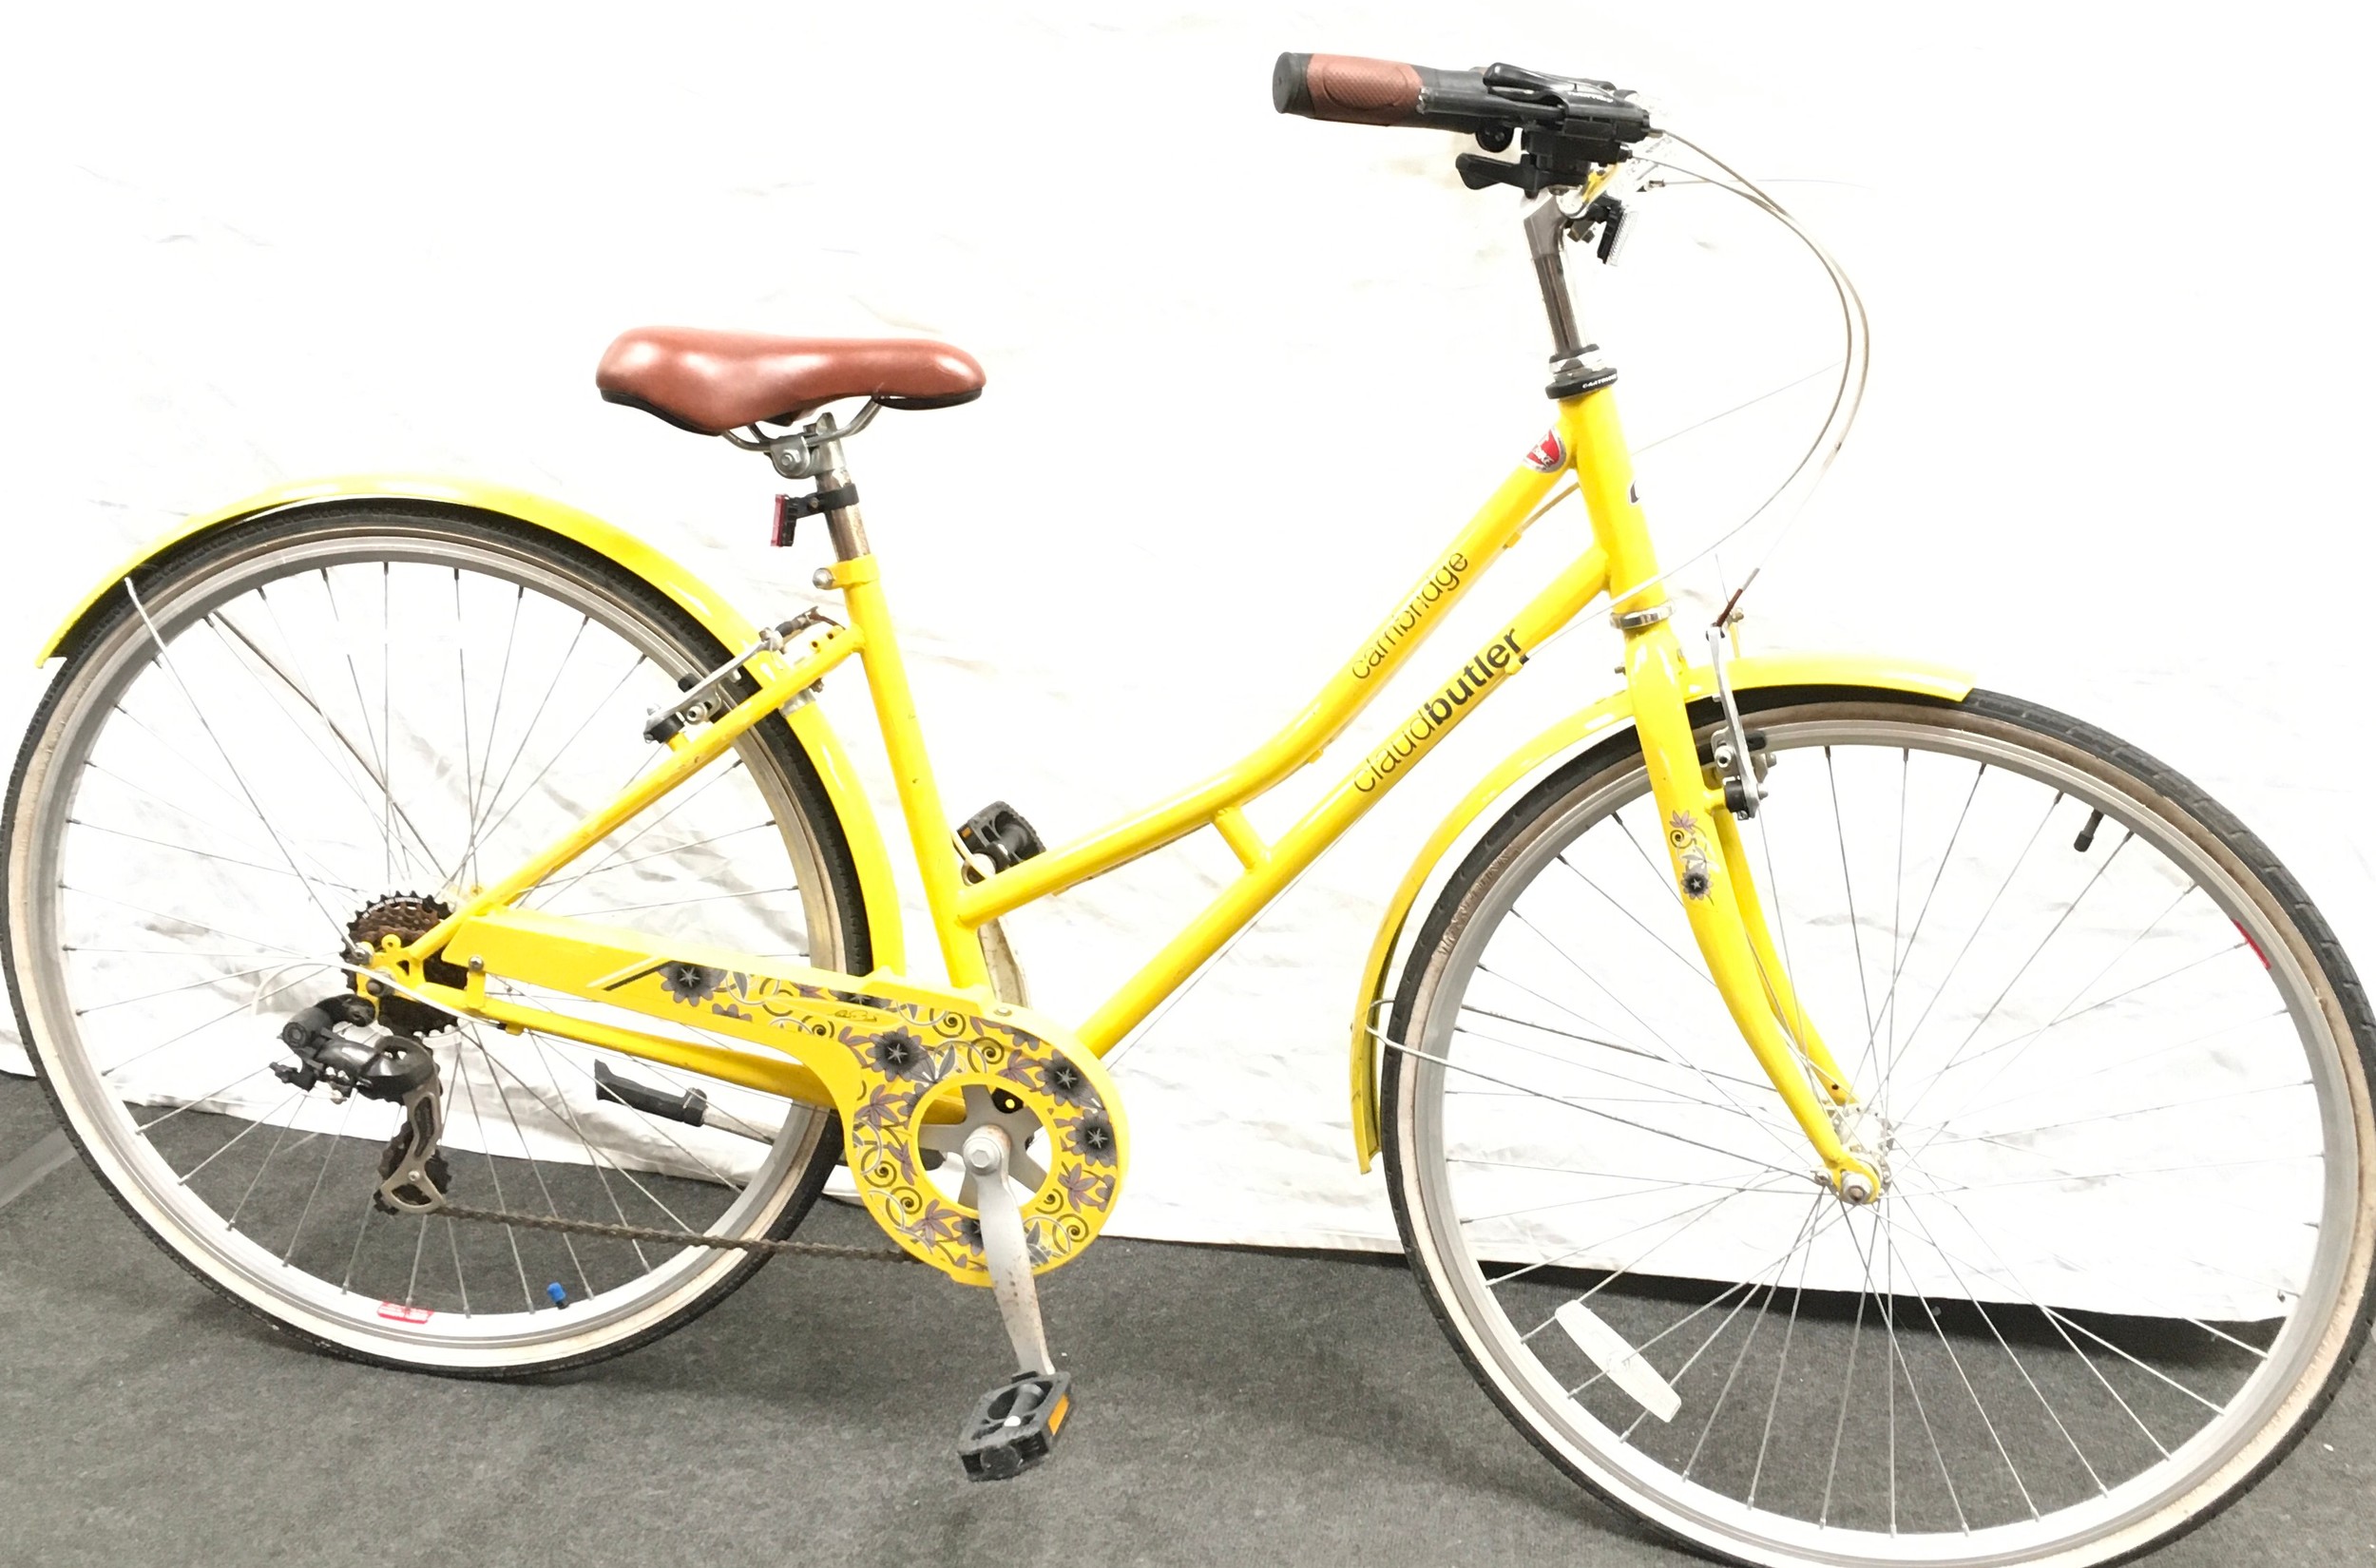 A Claude Butler Cambridge yellow bicycle, with 6 gears and frame size 18"/46cm